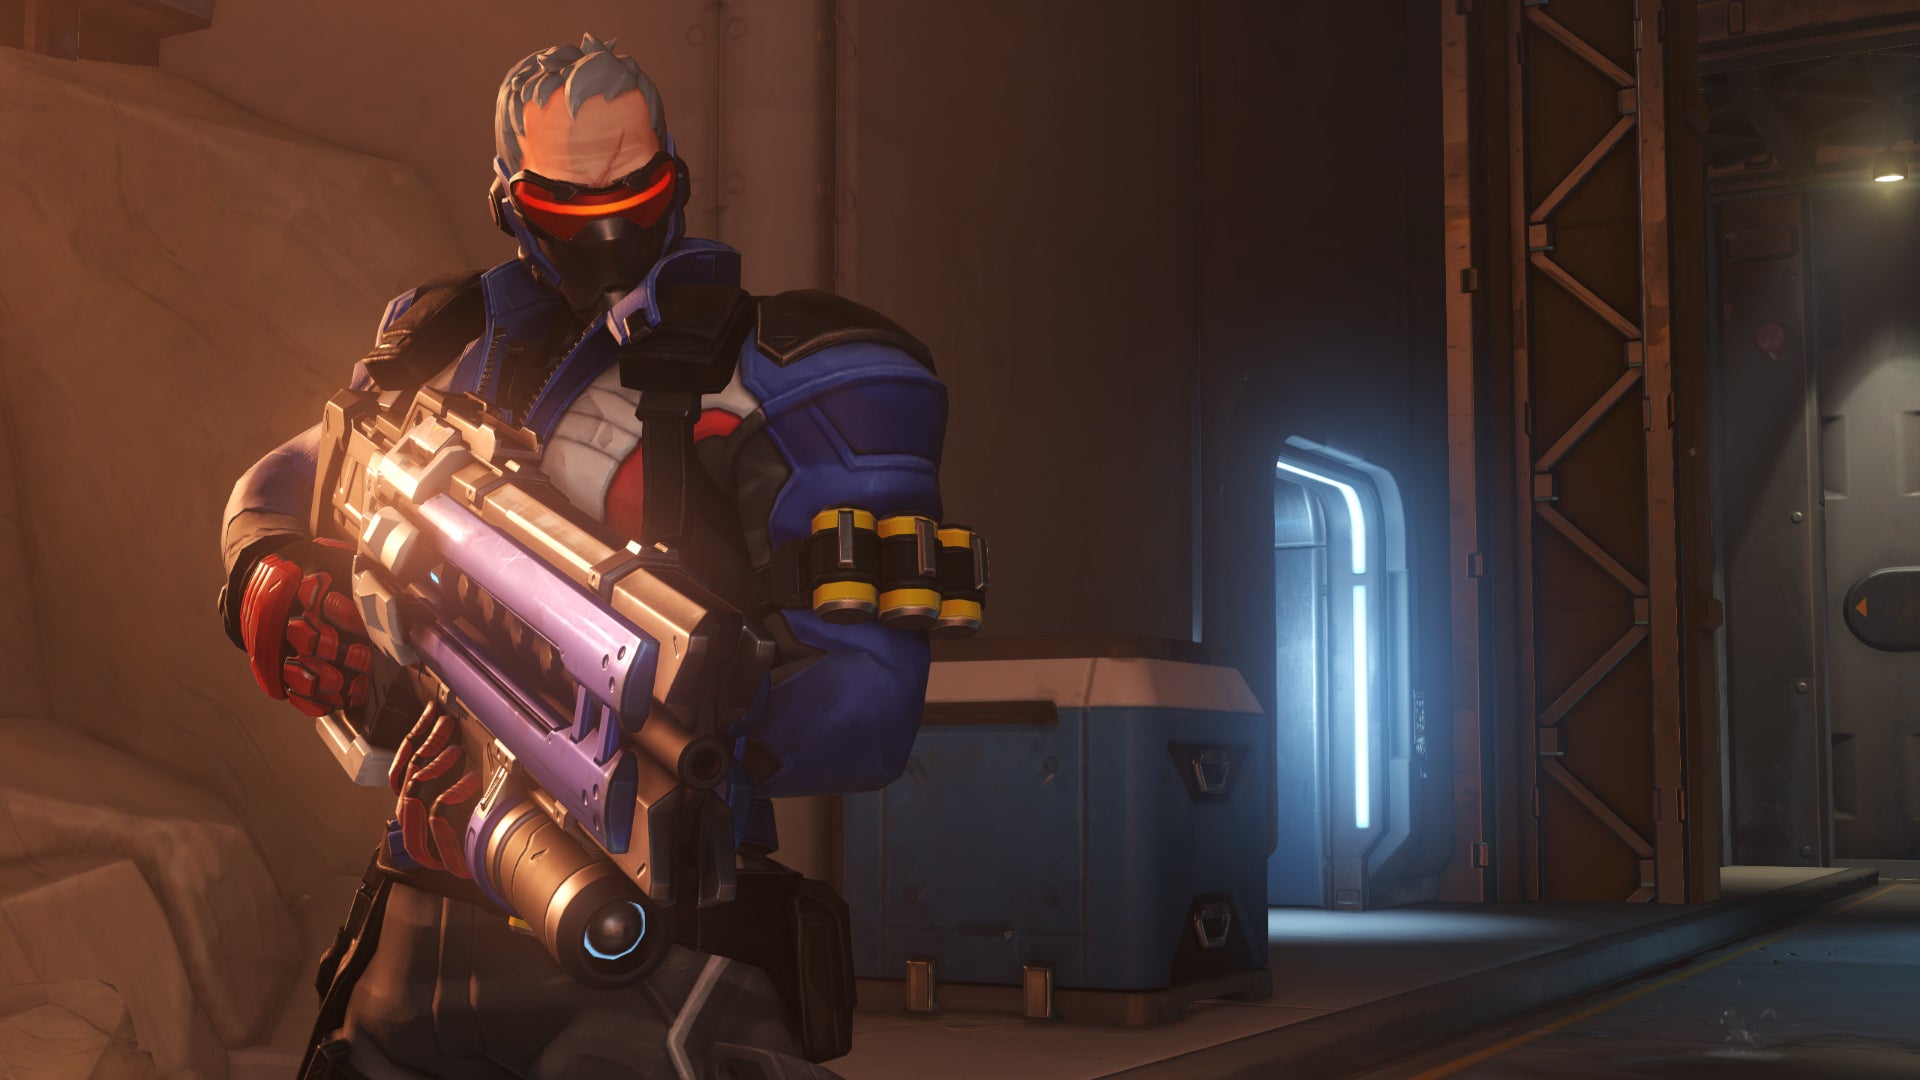 Soldier: 76, a hero in Overwatch 2, stands in front of the camera on the left-hand side, holding his assault rifle.